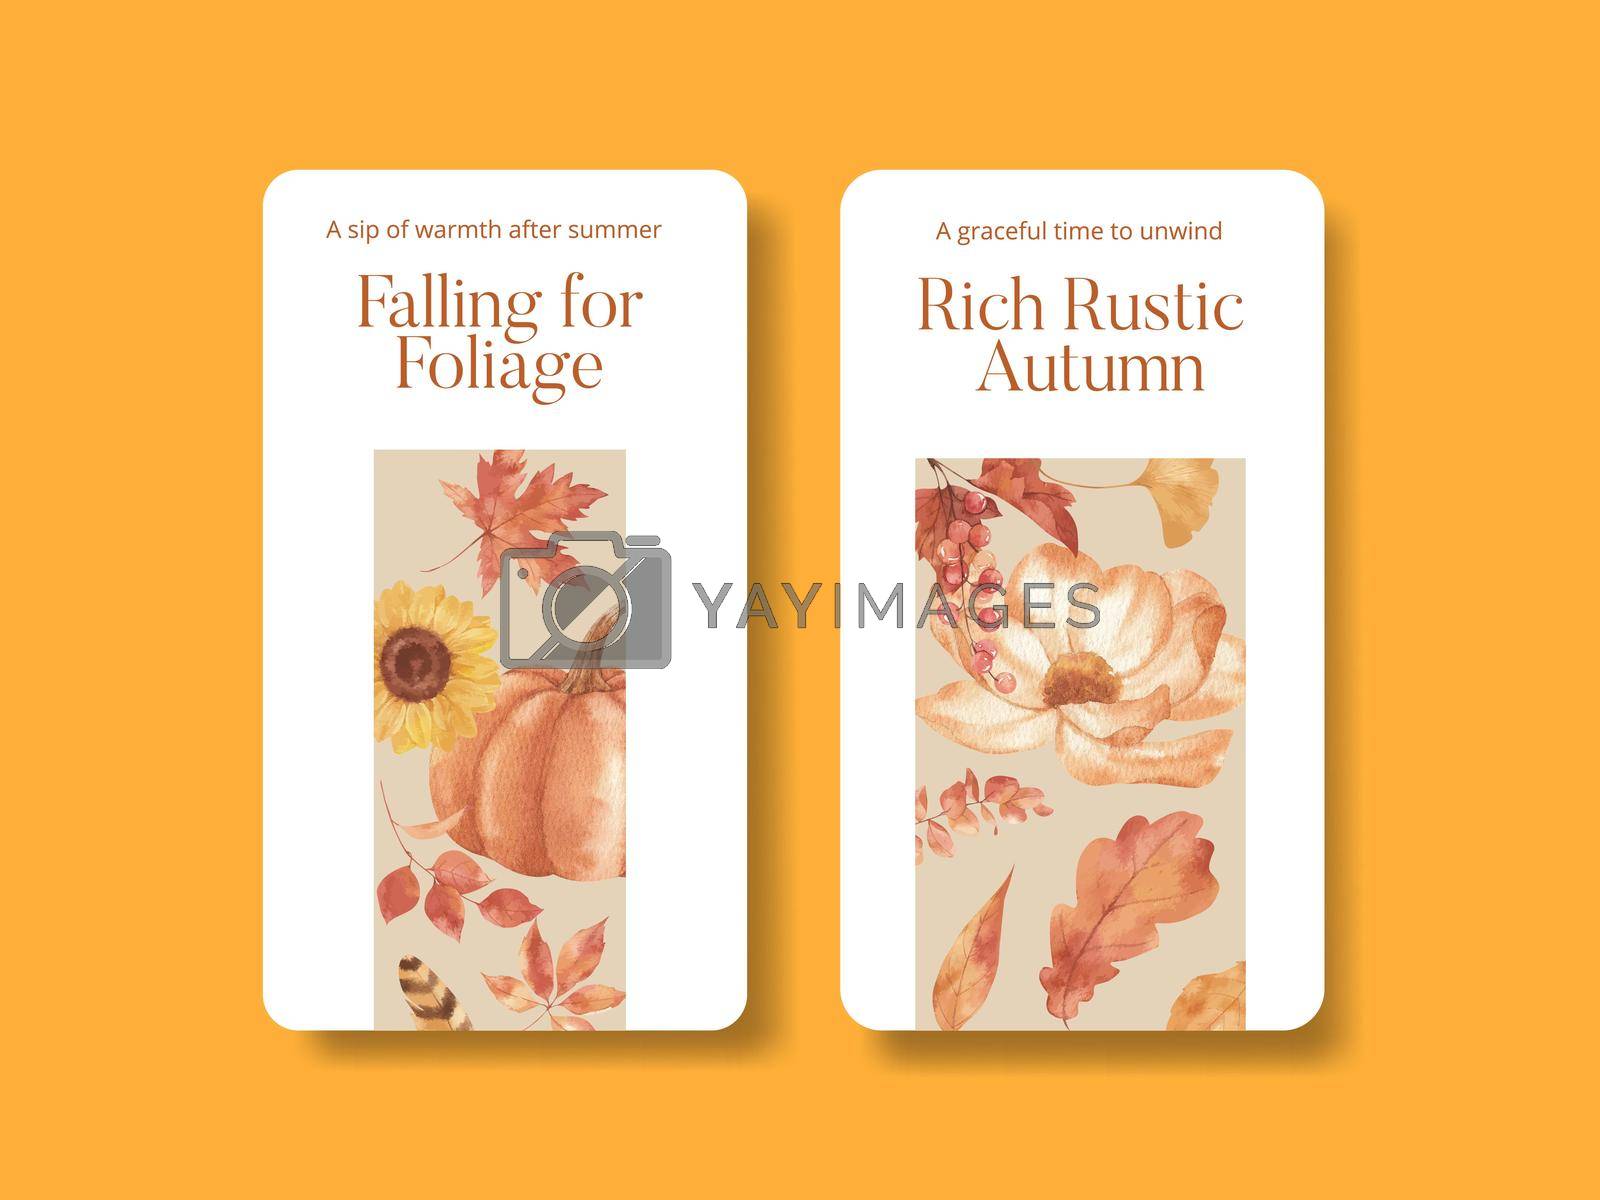 Royalty free image of Instagram template with rustic fall foliage concept,watercolor style by Photographeeasia